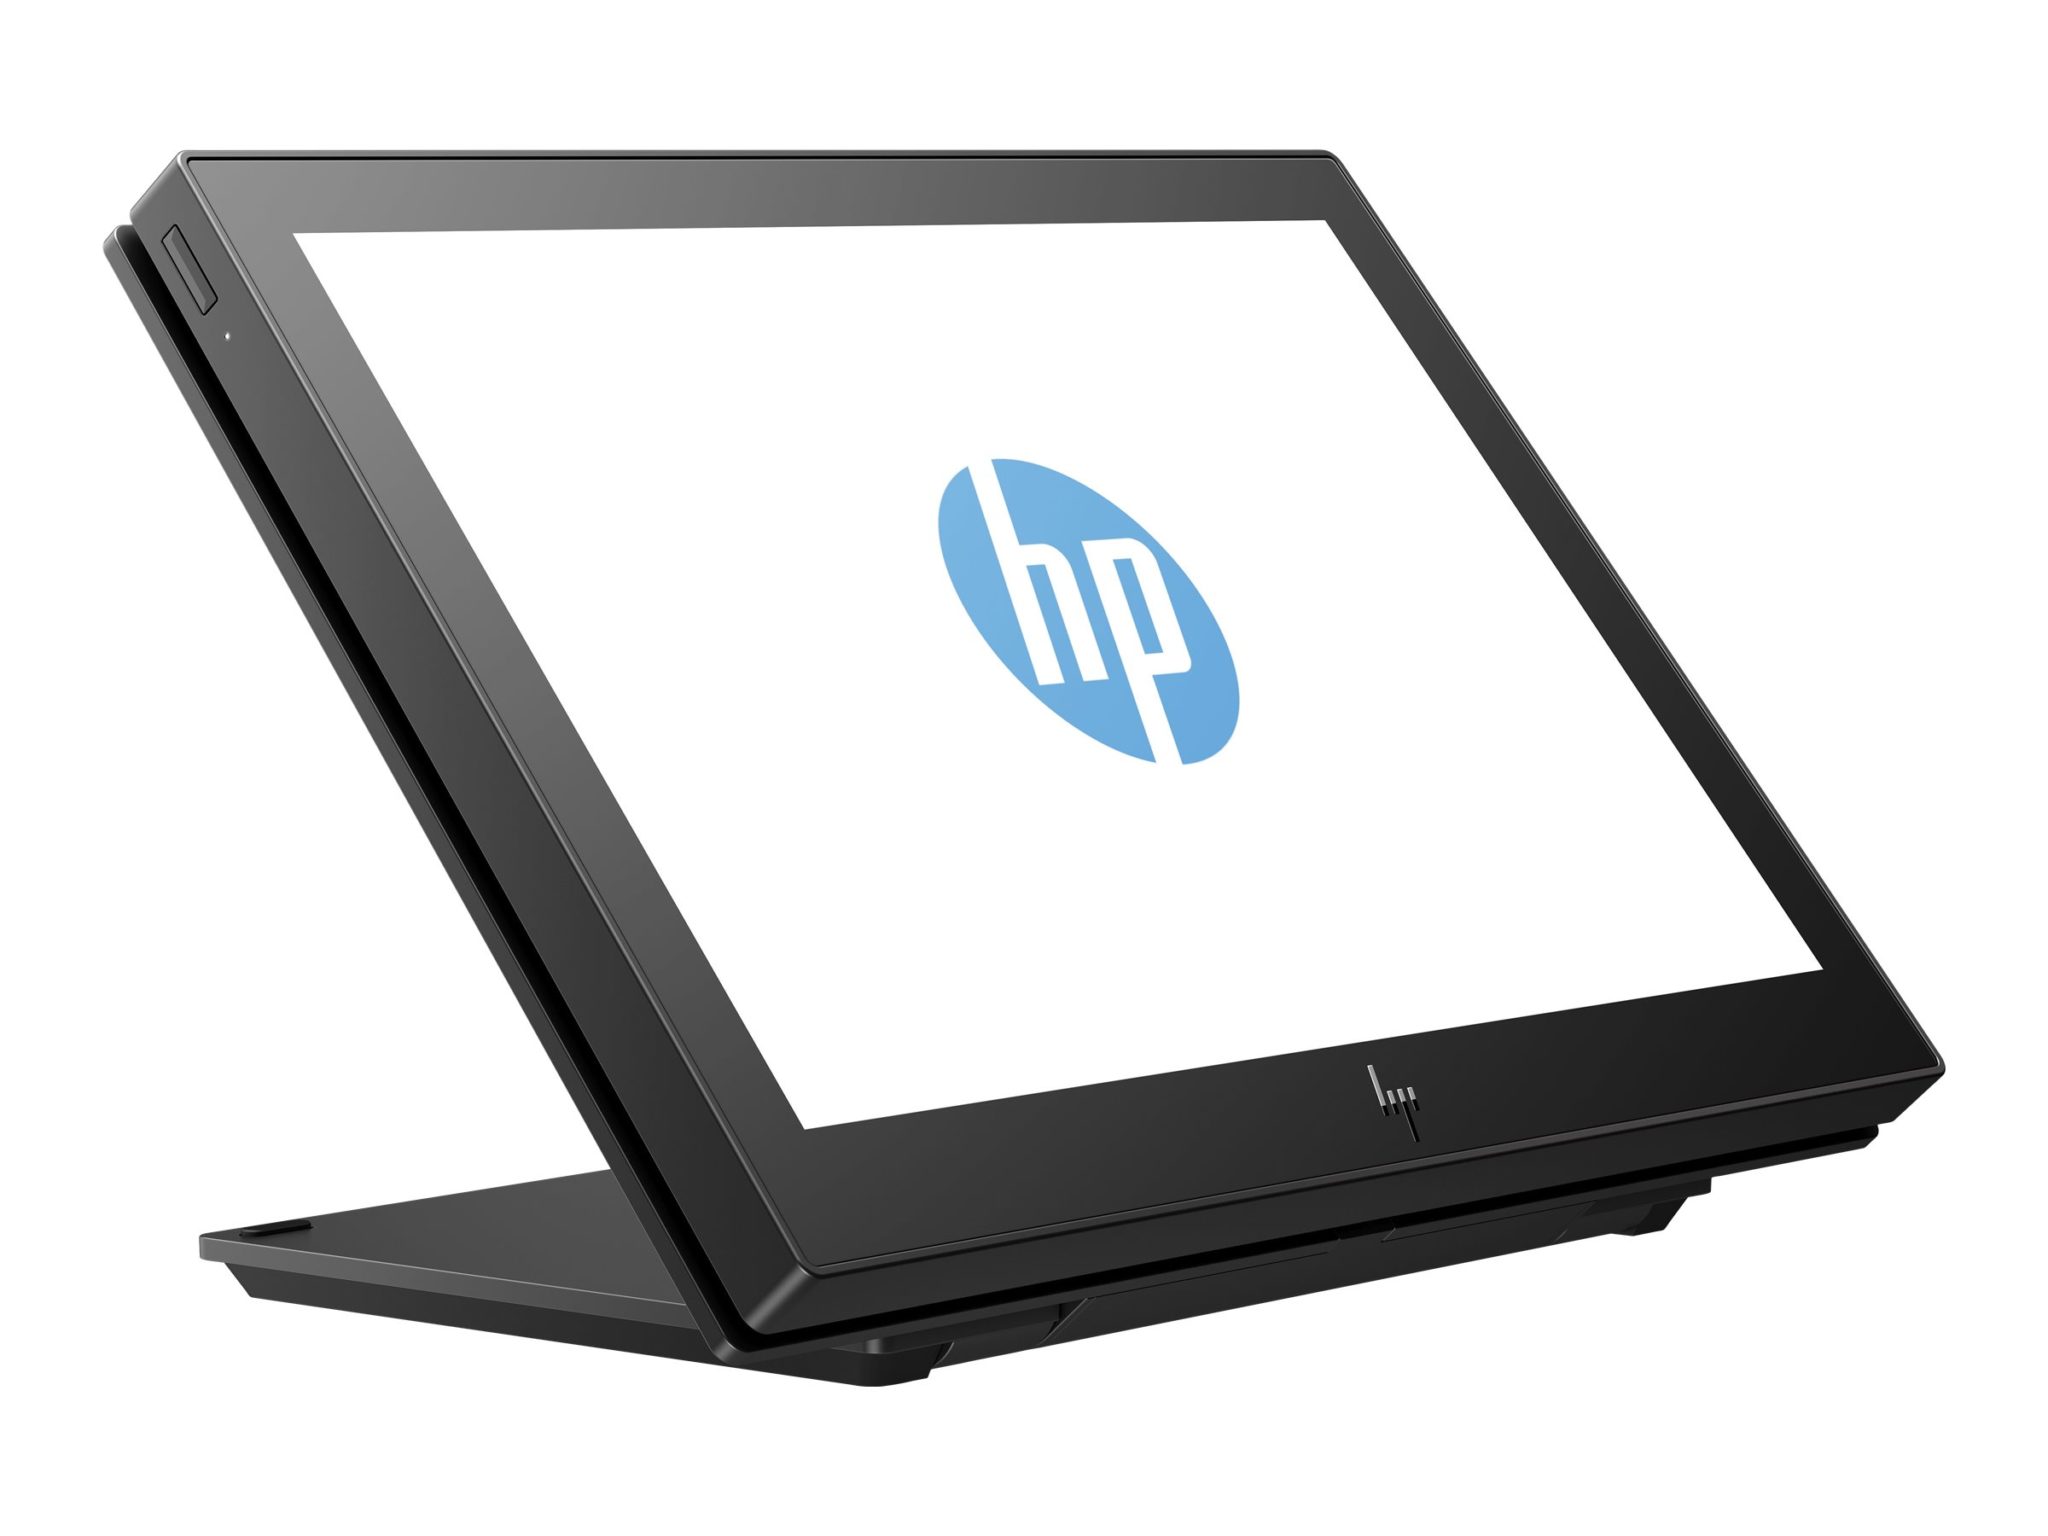 HP Elite Touchscreen - 10" - LED Point of Sale Monitor